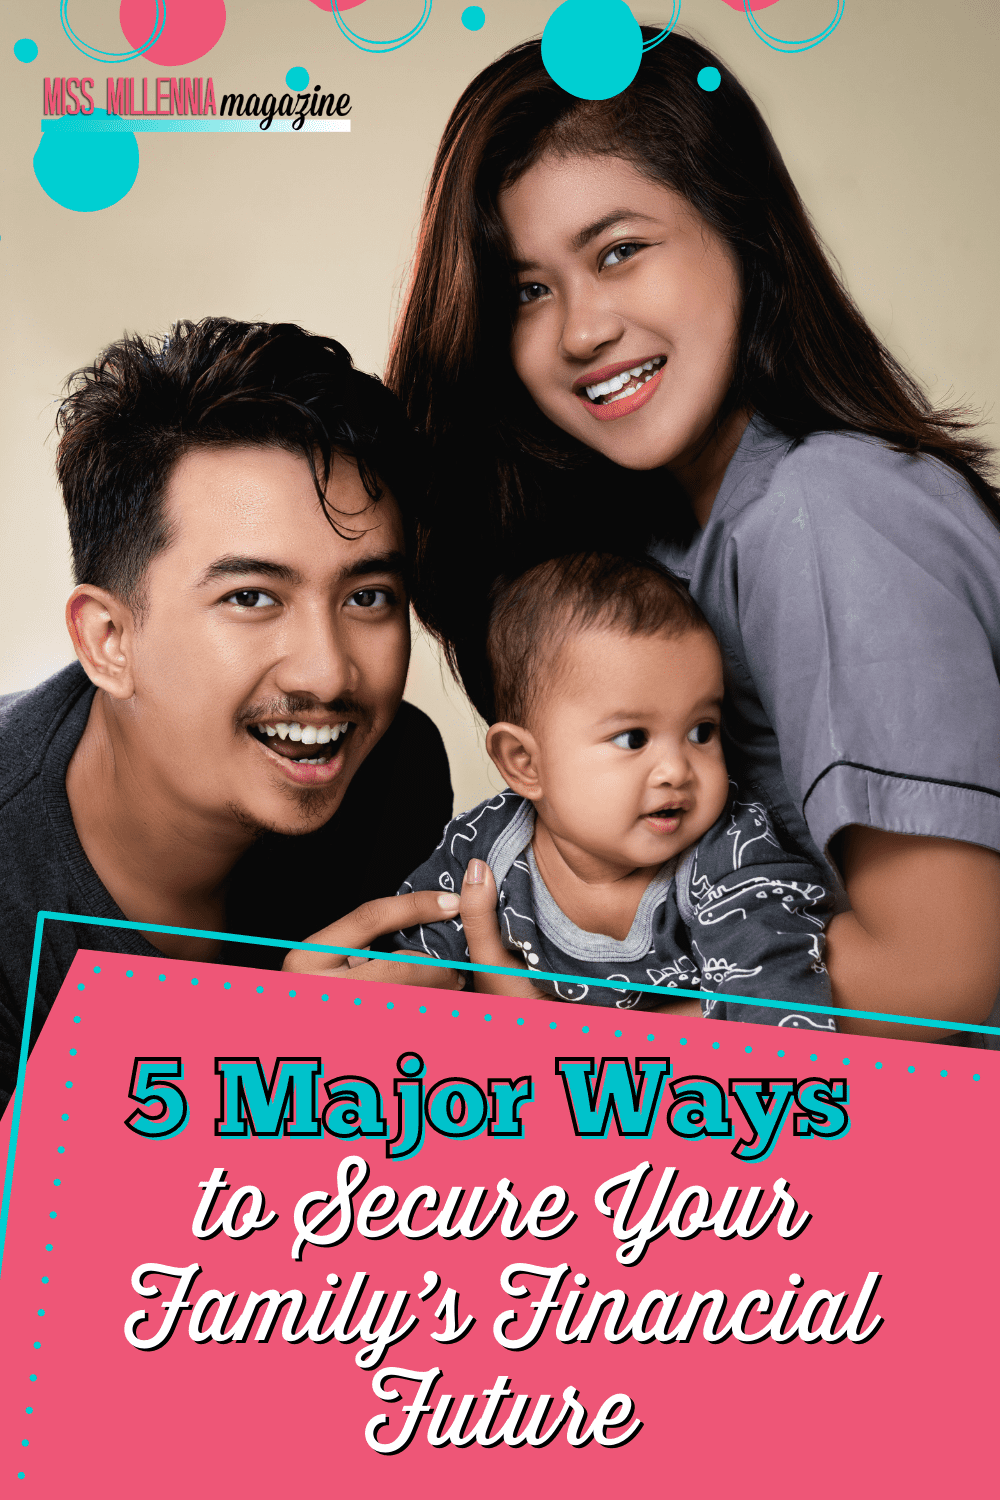 6 Major Ways to Secure Your Family’s Financial Future